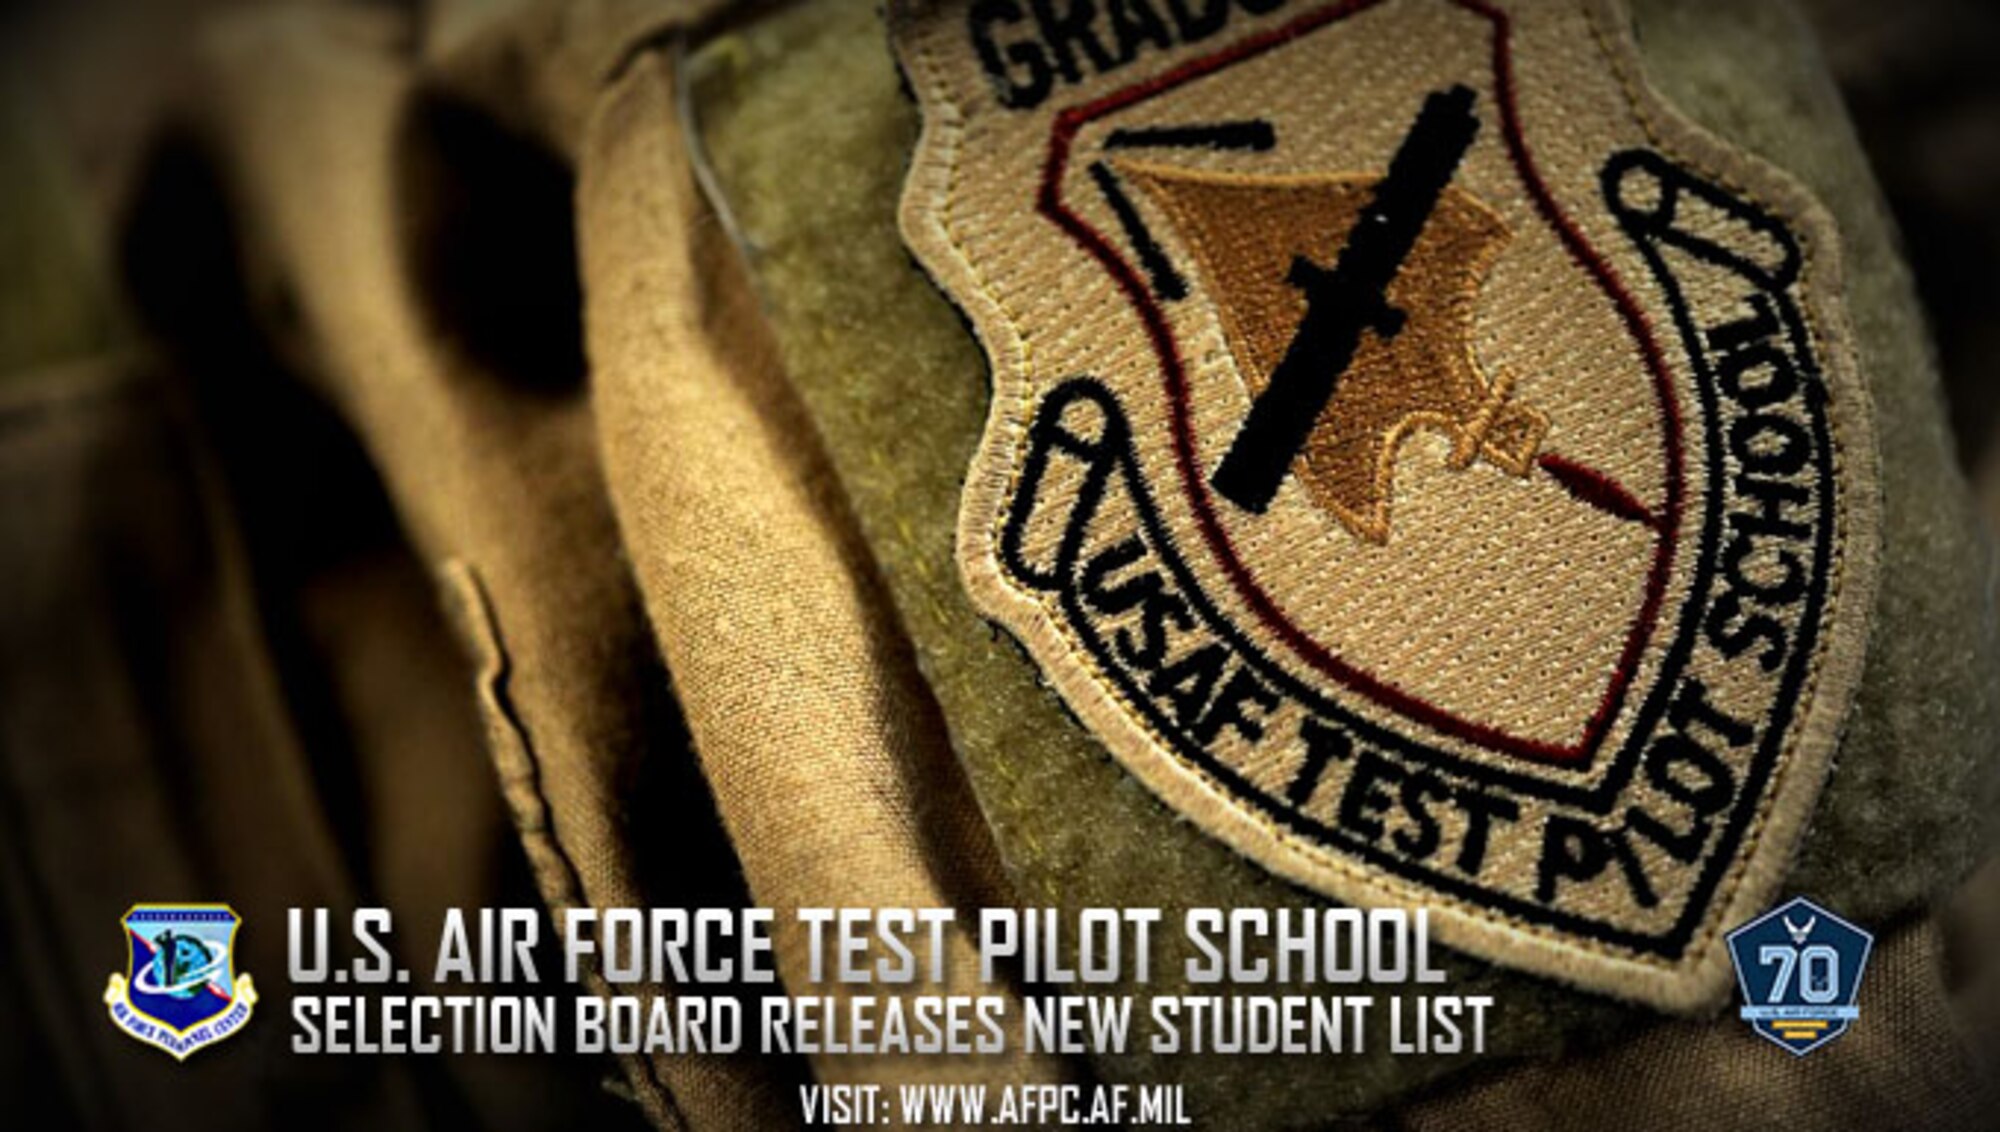 Air Force selects 63 officers, civilians for test pilot school >Air Force’s Personnel Center >Article Display” loading=’lazy’ style=”clear:both; float:left; padding:10px 10px 10px 0px;border:0px; max-width: 360px;”> It continues to be going to attempt to secure its regional goals, not least, the departure of US forces from Iraq. Similarly in Iraq after Camp Bucca was emptied and the Americans withdrew, many Sunnis regarded to the so-called Islamic State as their defenders from attacks by the Shia dominated security forces and so-called “dying squads” that were the instrument of the predominantly Shia authorities. The Hawija killings had a profound impression on the Sunni neighborhood just as “Bloody Sunday” did on the Catholic community in Northern Eire, driving many into the arms of the IRA and IS. The Sunni Vice-President, Tariq al-Hashemi, was accused of terrorism and now lives in exile underneath sentence of dying. Now the corporate has grown to the point that it receives recognition from Forbes, Smart Cash, and the Huffington Publish.</p>
<p> Gold is a tangible asset that is not affected by the inventory market, so it may well present a hedge against market downturns. According to a comparatively new research by CPM Group, including bodily valuable metal bullion products to fairness and bond allocations improves the return to danger profile of the entire investment portfolio. Choosing an IRA gold transfer implies that the funds go directly to your gold IRA custodian, eliminating the danger of extra charges or penalties. Gold options: We seemed for companies that provide a variety of gold choices so that you’ll find the proper funding for your needs. First, it allows you to invest in bodily gold without having to pay the excessive premiums related to shopping for gold coins or bars from a supplier. This checklist includes the Delaware Depository, where your metals are insured as much as $1 billion. As a result of JM Bullion’s inventory includes a superb assortment of copper and platinum merchandise, customers have the opportunity to order this stuff in bulk, as effectively. Those on the lookout for an IRA custodian that has international storage options might also want to check out Noble Gold. An merchandise offered for $300, might truly only be price $100.</p>
<p> Of course, there are lots of sorts of each merchandise to select from, and it can be robust to determine which is greatest for your particular portfolio goals. When buying an item in bulk, you merely want to pick out the product you wish to order, enter a amount that falls within considered one of our bulk pricing tiers, and add it to your “Shopping Cart.” The default cart price is our common pricing; one must first select the payment method before the discounted value for ACH, paper verify, bank wire, or bitcoin orders will seem. To buy copper and platinum in bulk, clients must observe the transaction procedures outlined within the above section for gold and silver bulk purchases. If you are utilizing gold or silver as a means so as to add some stability to your portfolio and hedge in opposition to big swings in other markets, you may want to contemplate volatility before you buy. How a lot gold is there in London – and the place is it? This flexibility means you’ll be able to await optimum market situations earlier than you promote. The South African Mint produced it to assist market gold from South Africa.</p>
<div class=